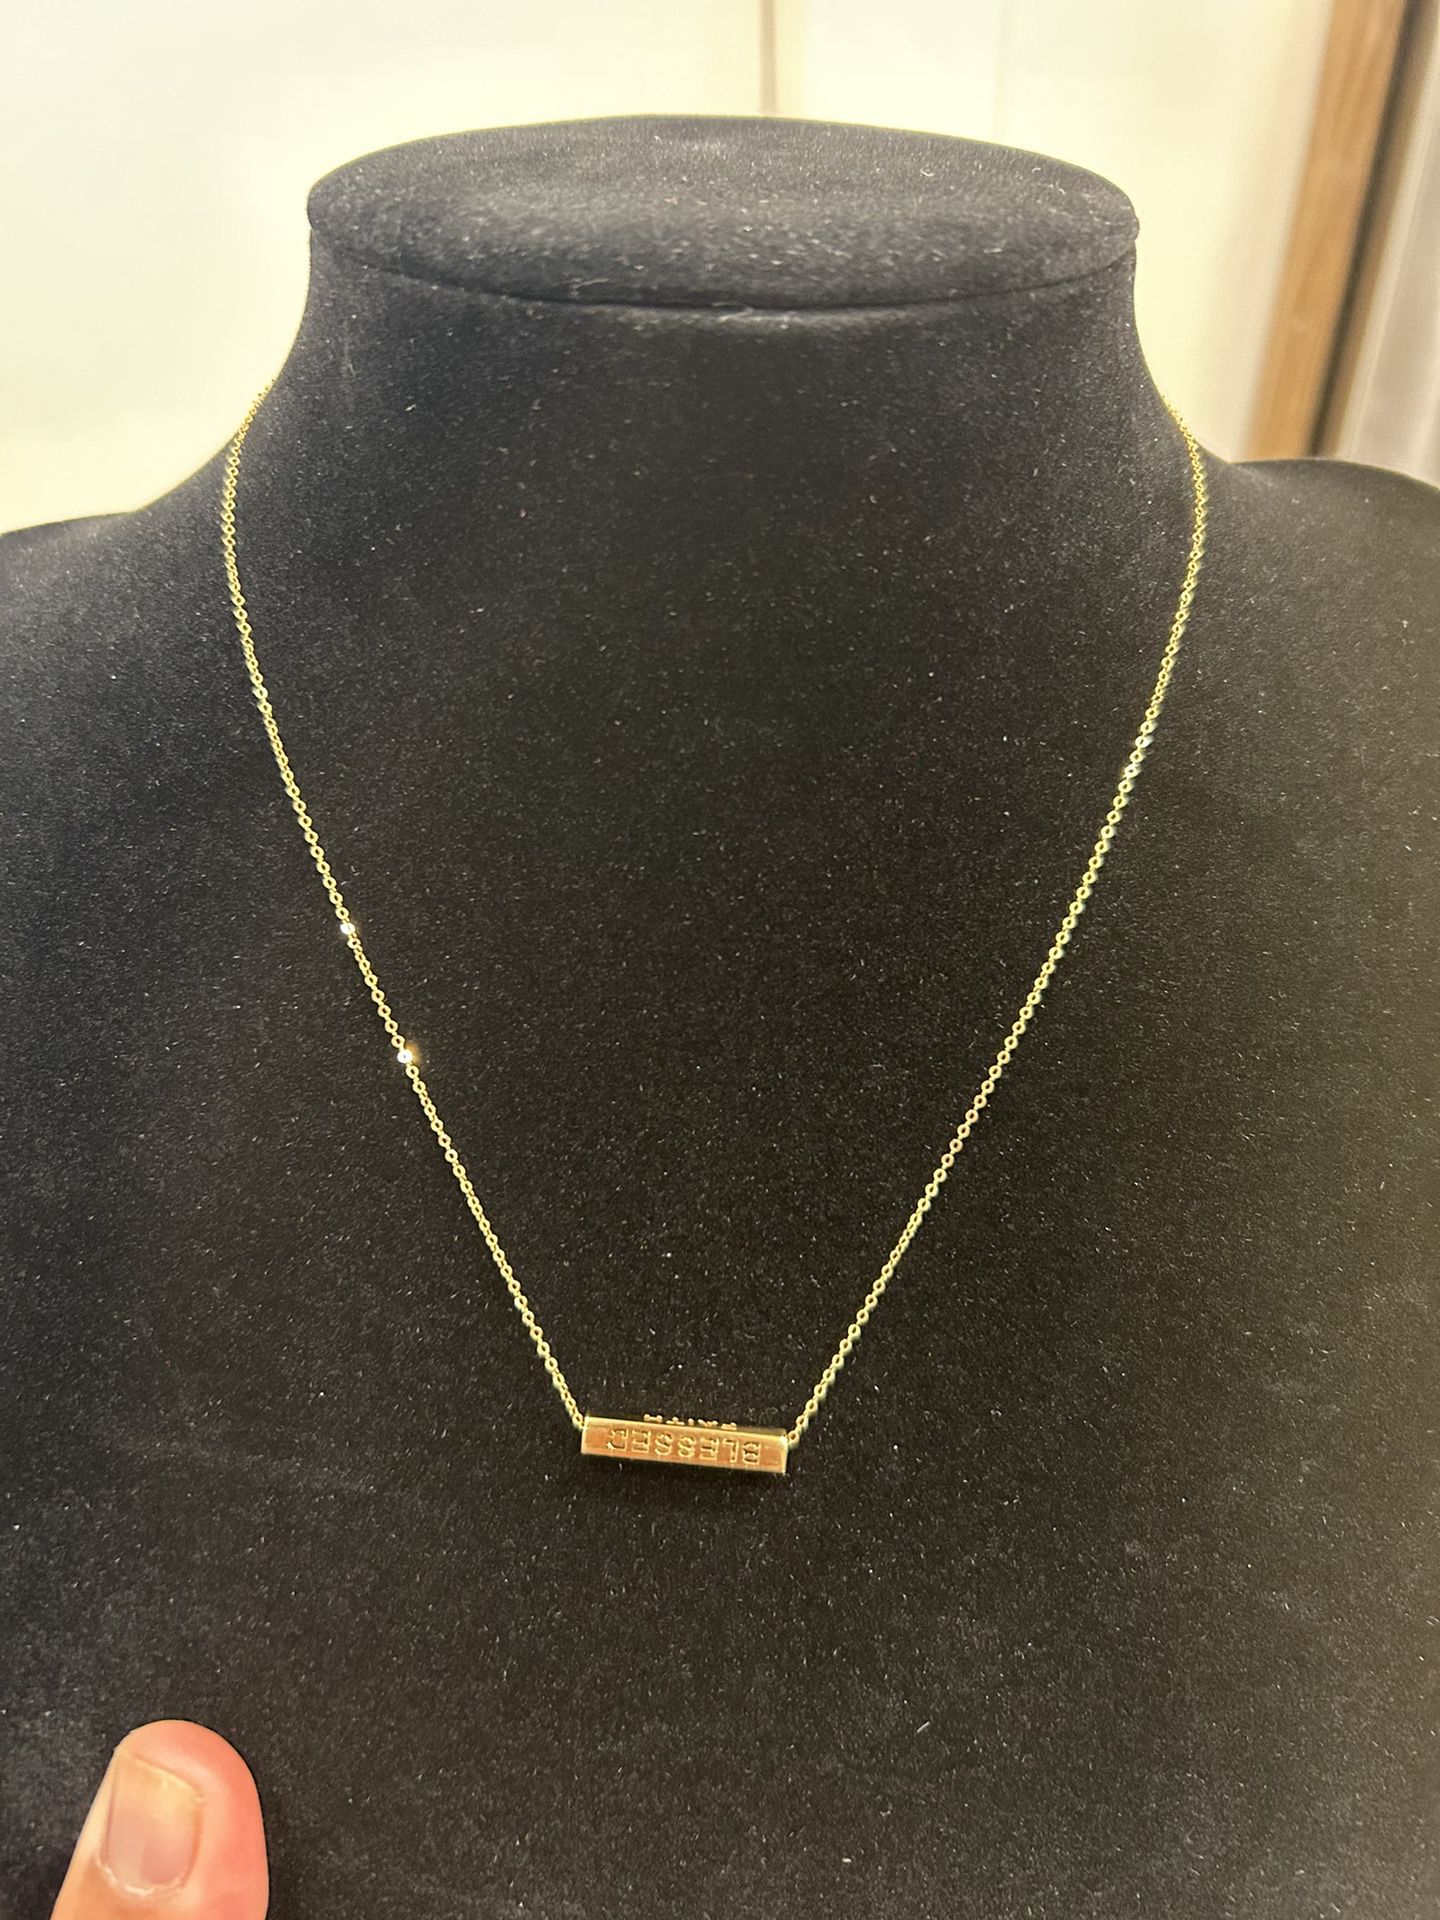 14k solid gold chain